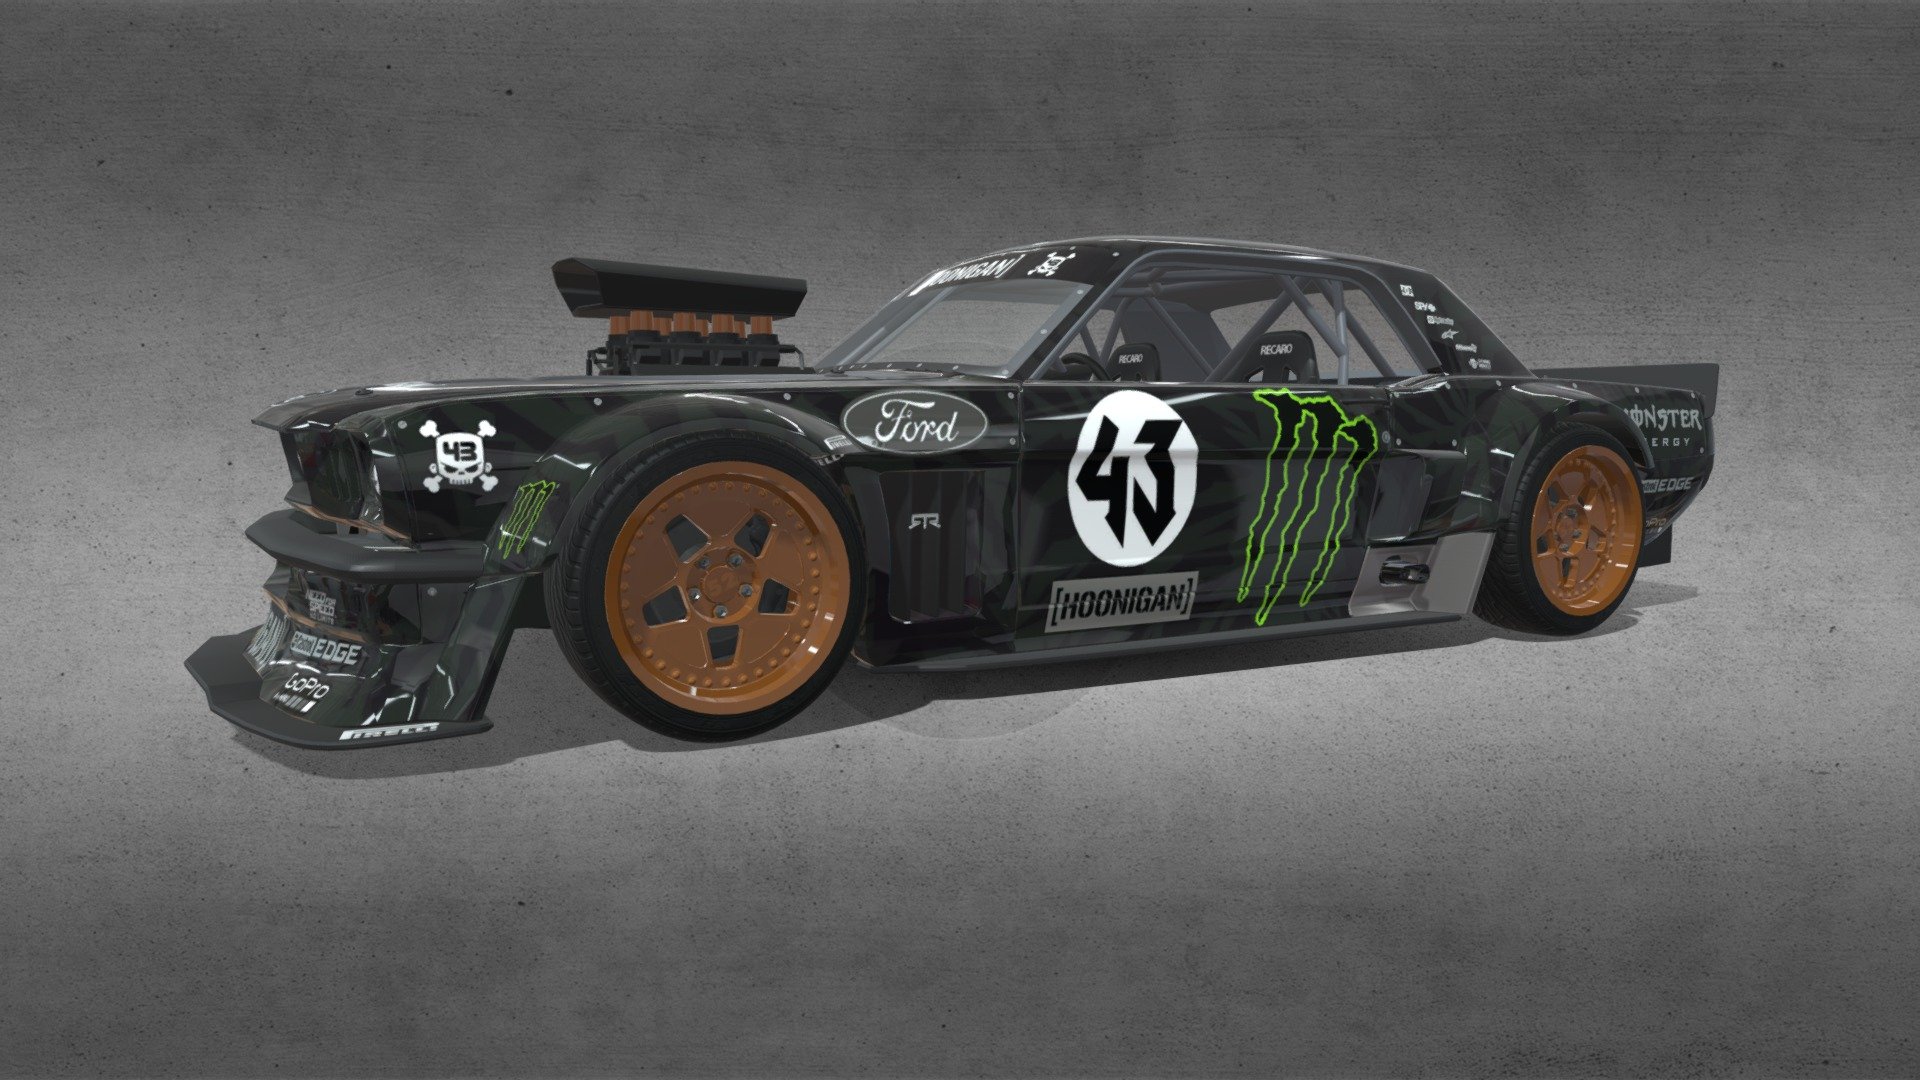 Midpoly model of the 1965 Ford Mustang Hoonicorn for Ken Block. The Ford Mustang Hoonicorn RTR is an extensively modified 1965 Mustang Coupe built by Hoonigan and ASD Motorsports. An Ford V8 gulps down air through eight individual throttles reaching through the hood as it sends 845 horsepower to all four wheels via a custom six-speed sequential dogbox and all-wheel drive driveline....All done in Blender 2.93 and the textures in Photoshop 3d model